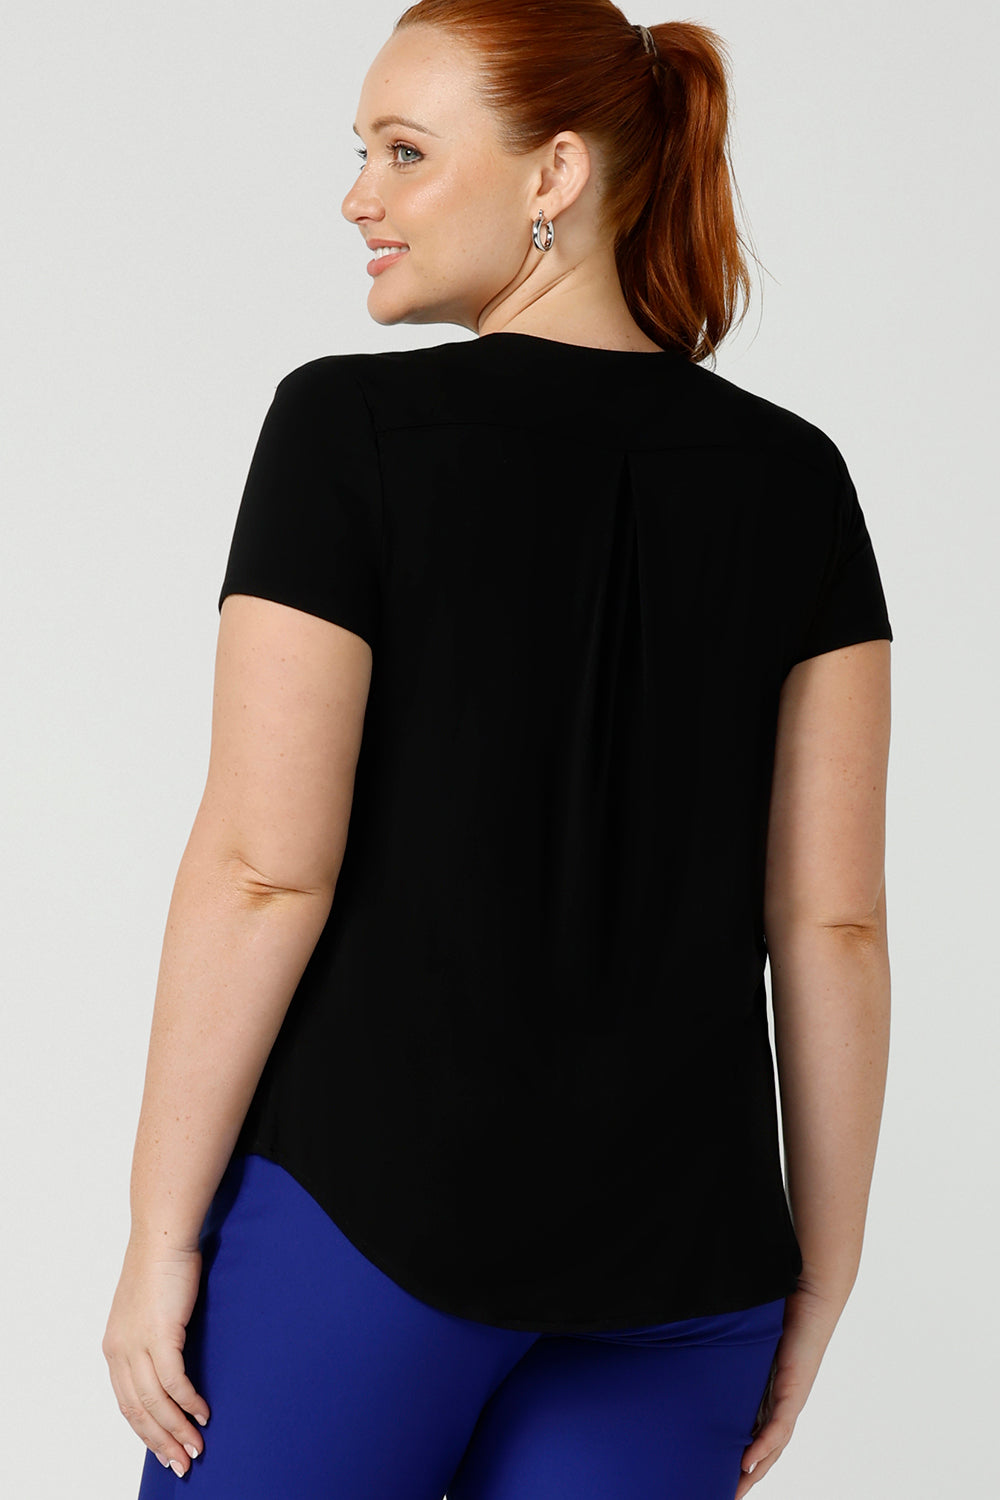 Back view of a good top for your capsule wardrobe. This V-neck bamboo jersey top with short sleeves makes for a good office wear top for women, as well as a comfortable casual top. Shown on a size 12 woman, this black jersey top is made for curvy women by Australian women's clothing brand, Leina & Fleur. Shop black tops for women in sizes 8 to 24 in their online fashion boutique.